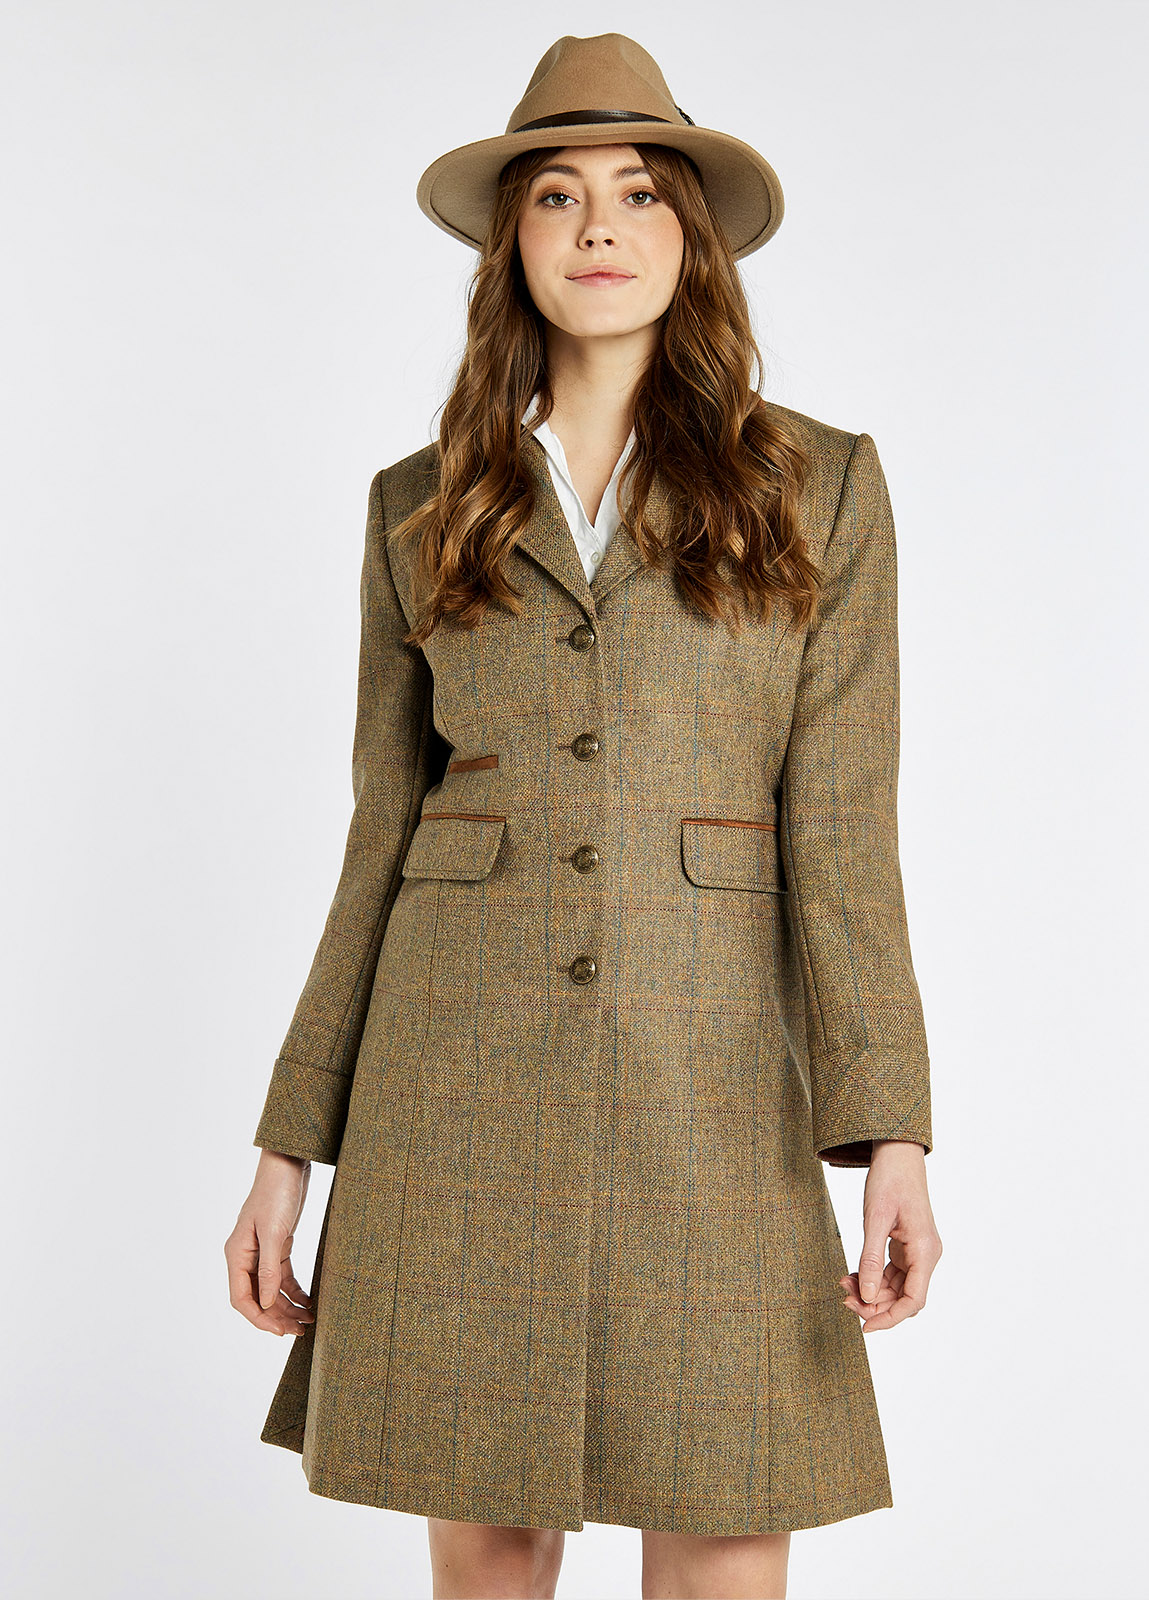 A woman modelling Dubarry women's Blackthorn Tweed Burren Jacket. A three-quarter-length tailored jacket buttoned all the way with besom pockets.